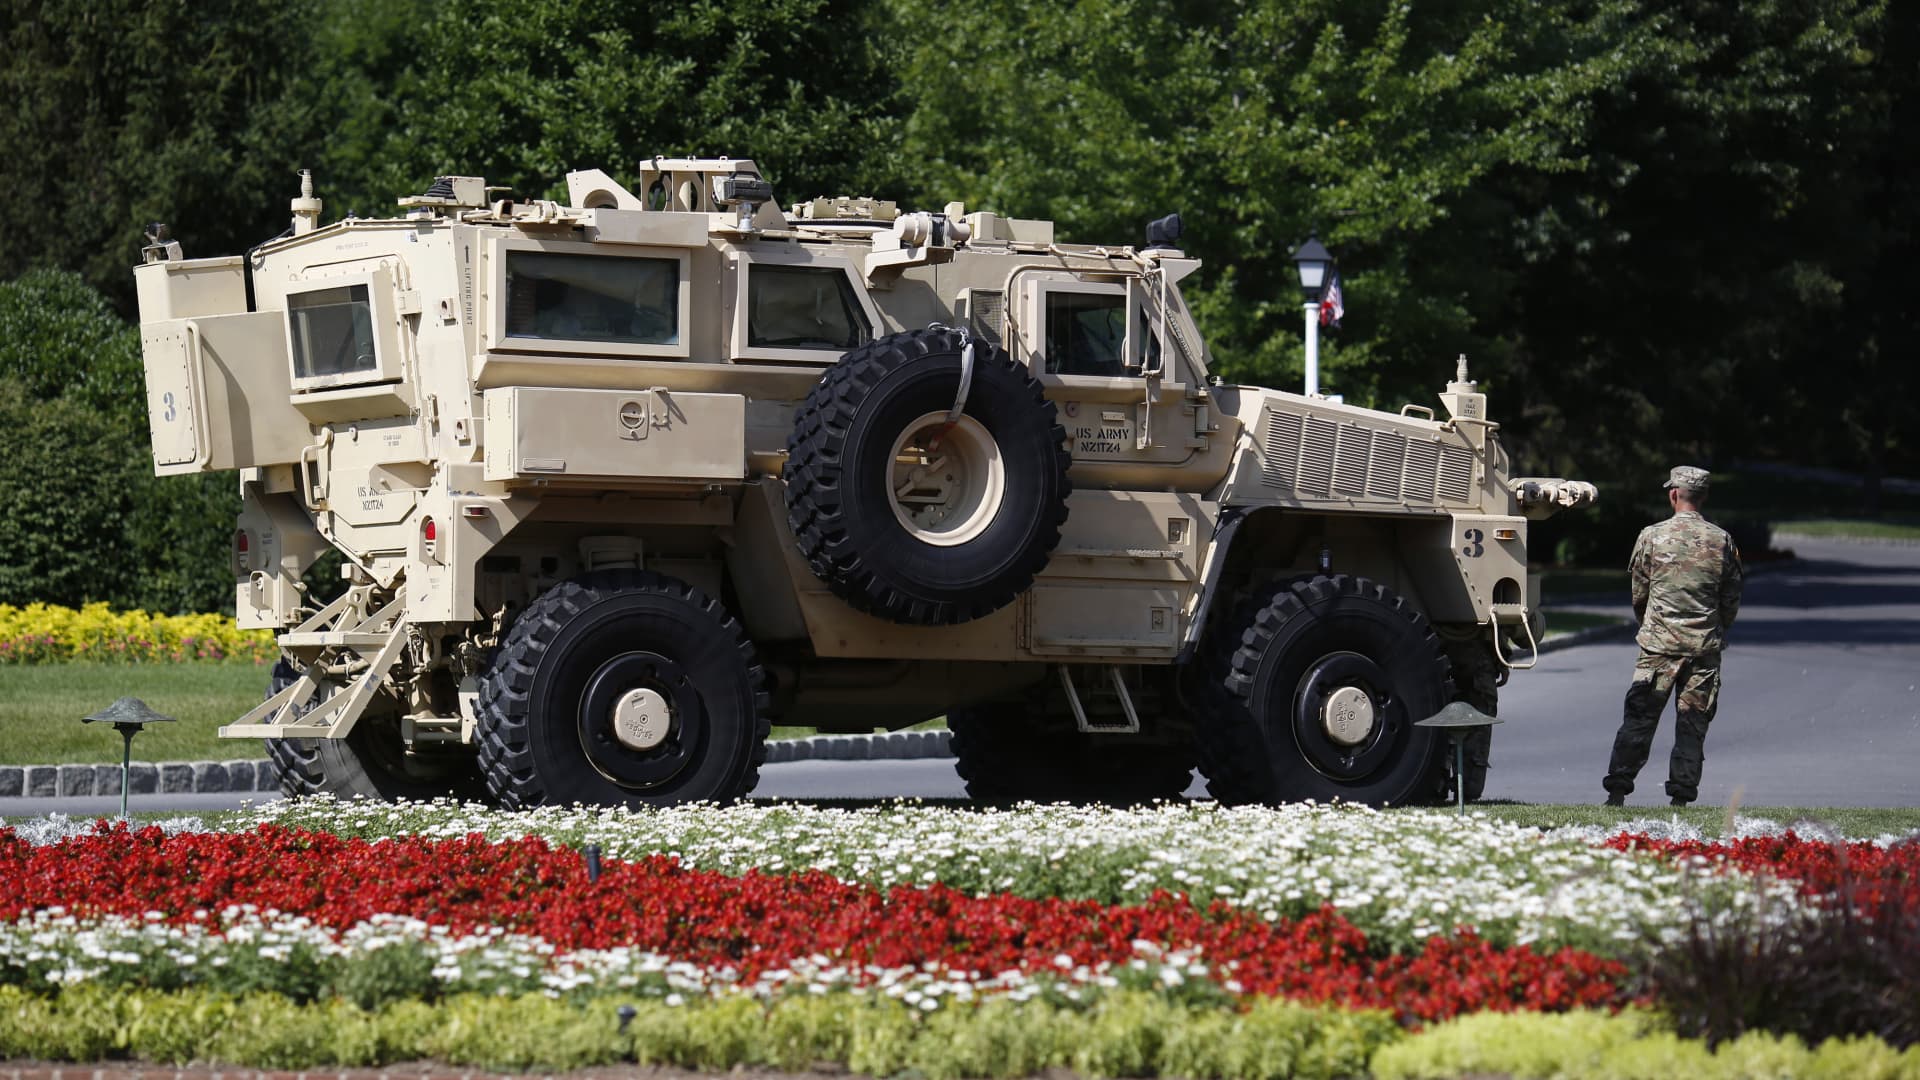 A solider stands in front of a Mine-Resistant Ambush Protected (MRAP) armored vehicle outside The Greenbrier resort ahead of a Salute to Service dinner with U.S. President Donald Trump, not pictured, in White Sulphur Springs, West Virginia, U.S., on Tuesday, July 3, 2018.